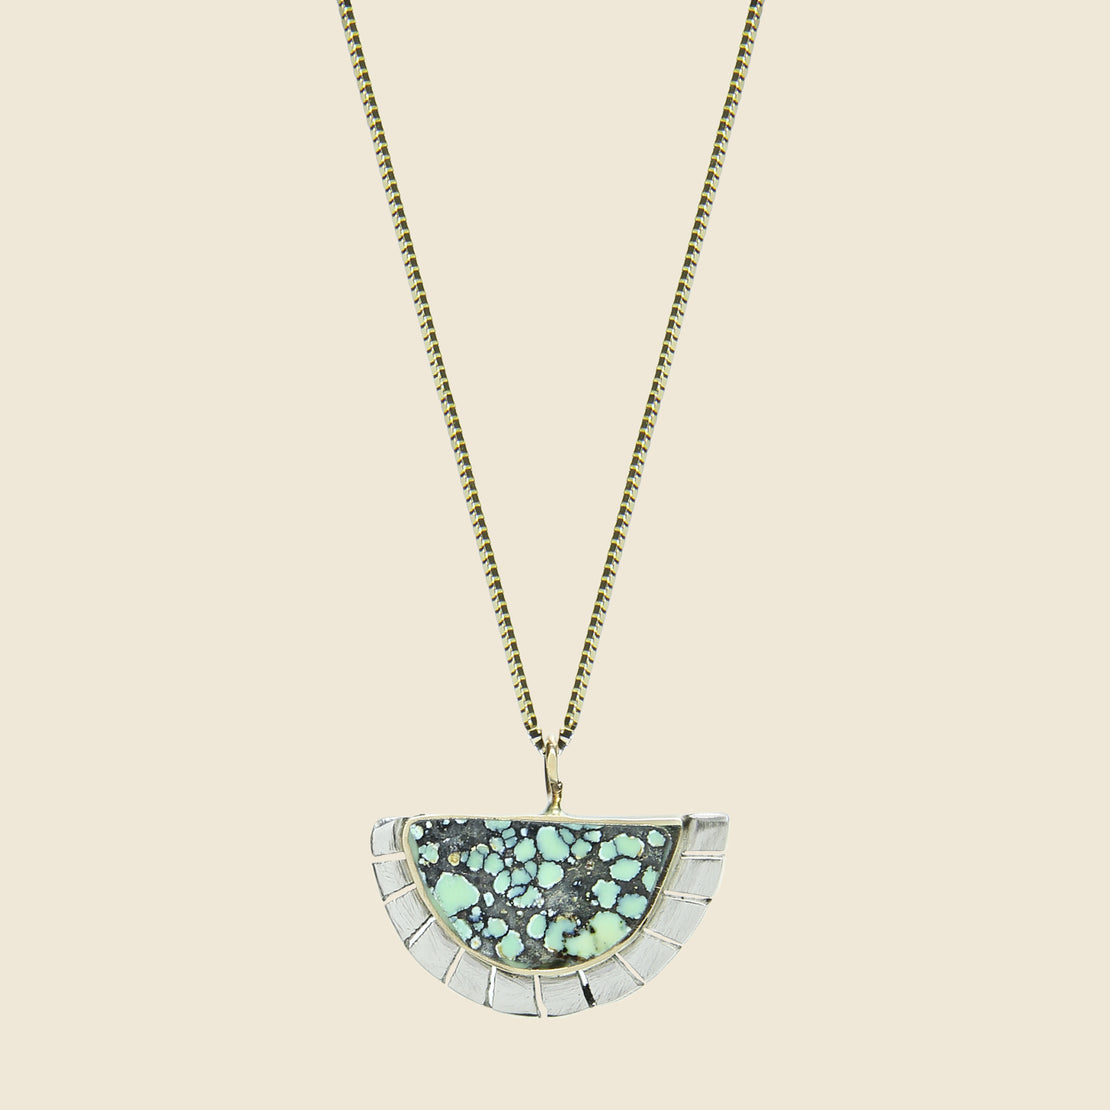 Young in the Mountains Selene Necklace - Peacock Turquoise